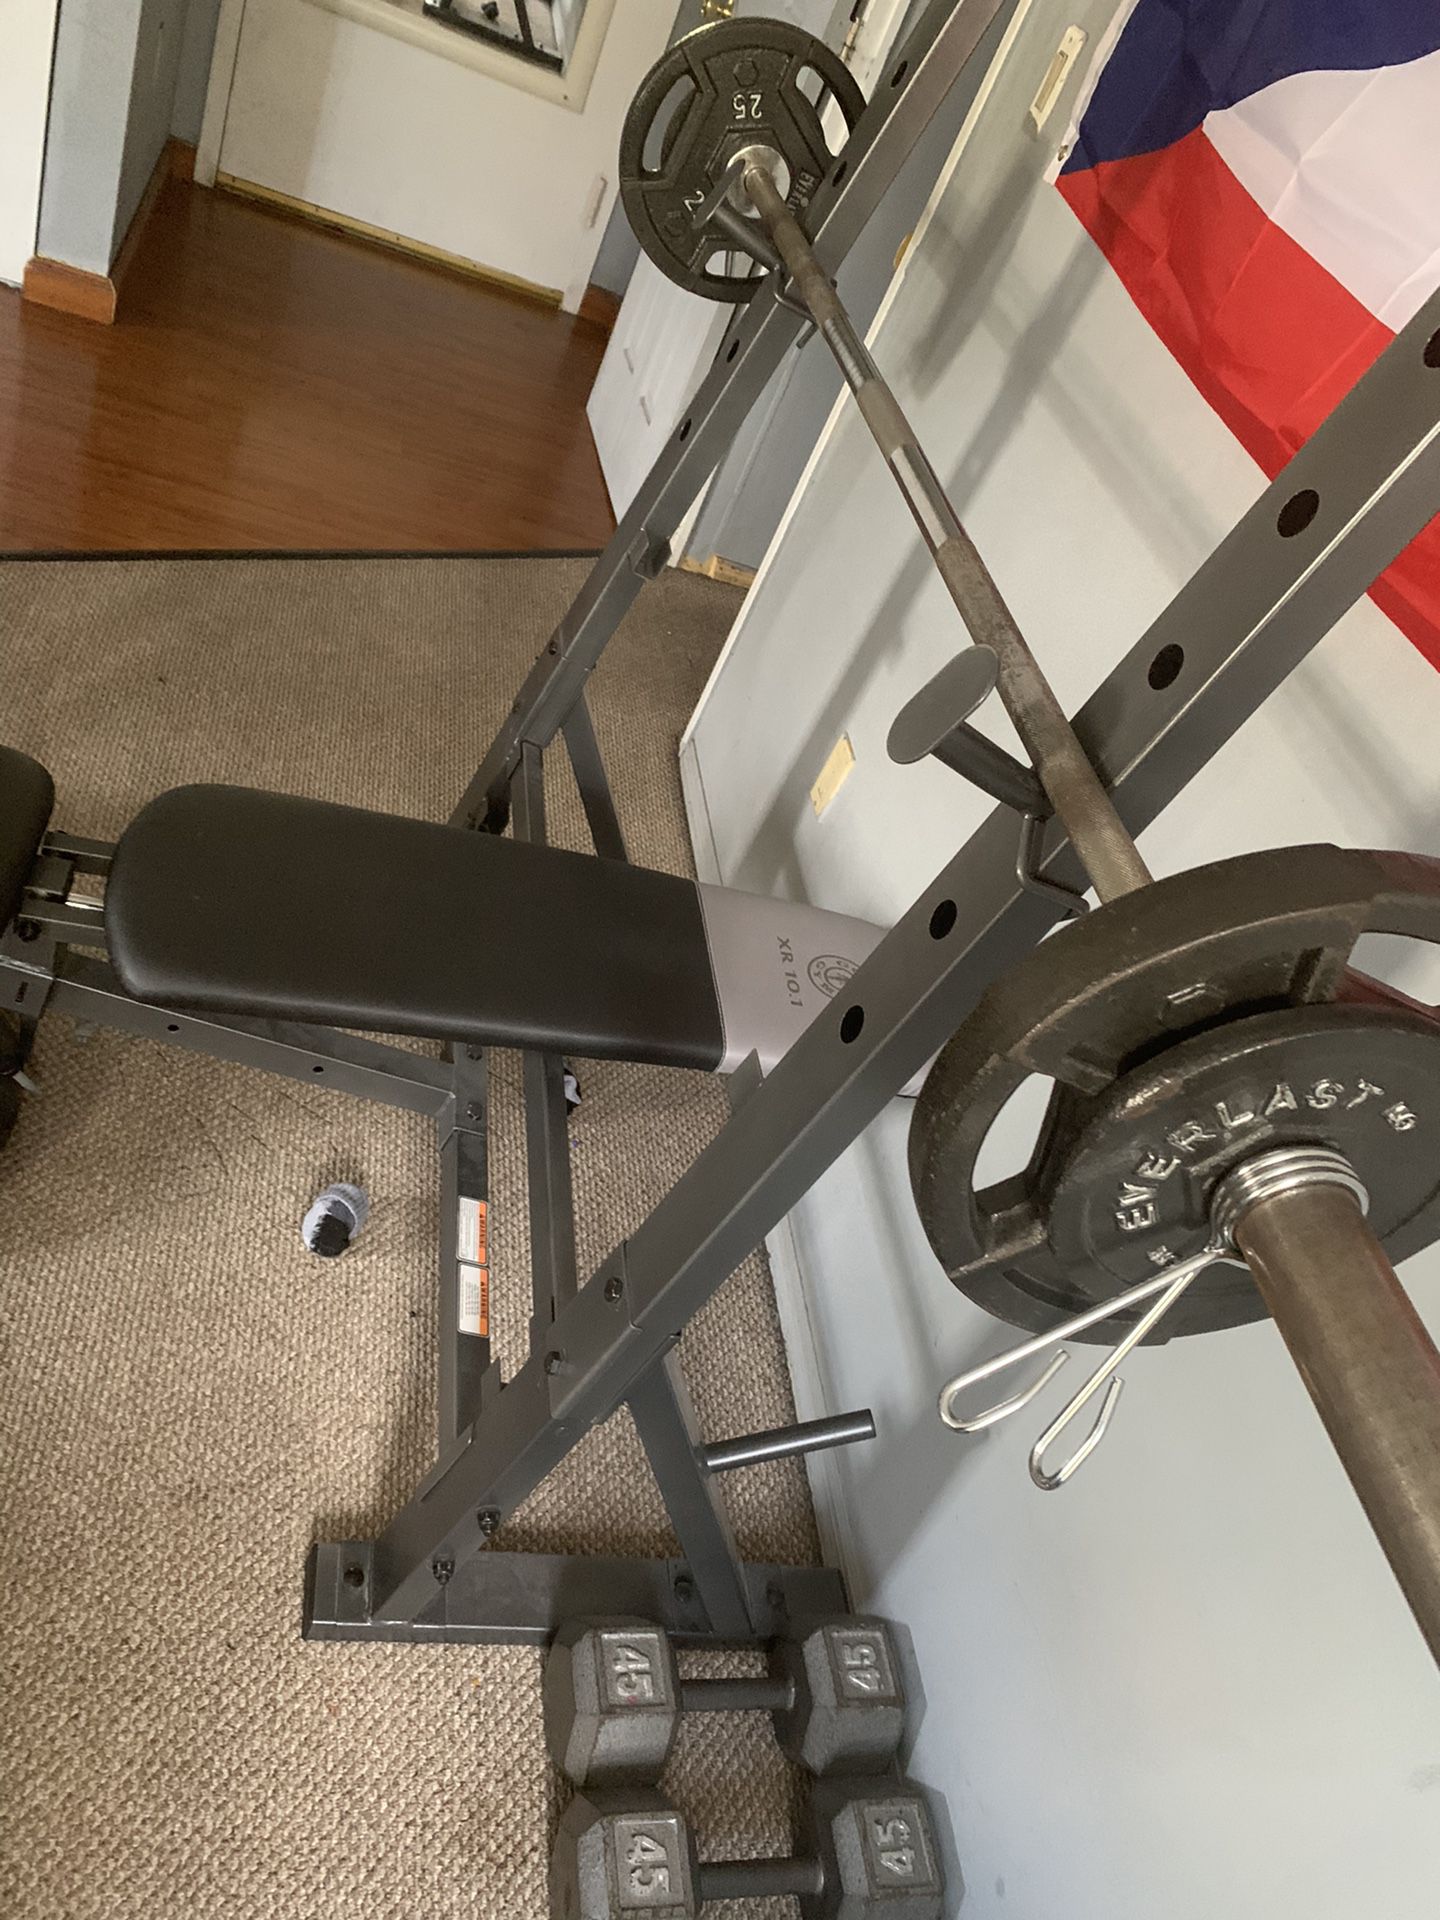 Bench press with weights and Bar